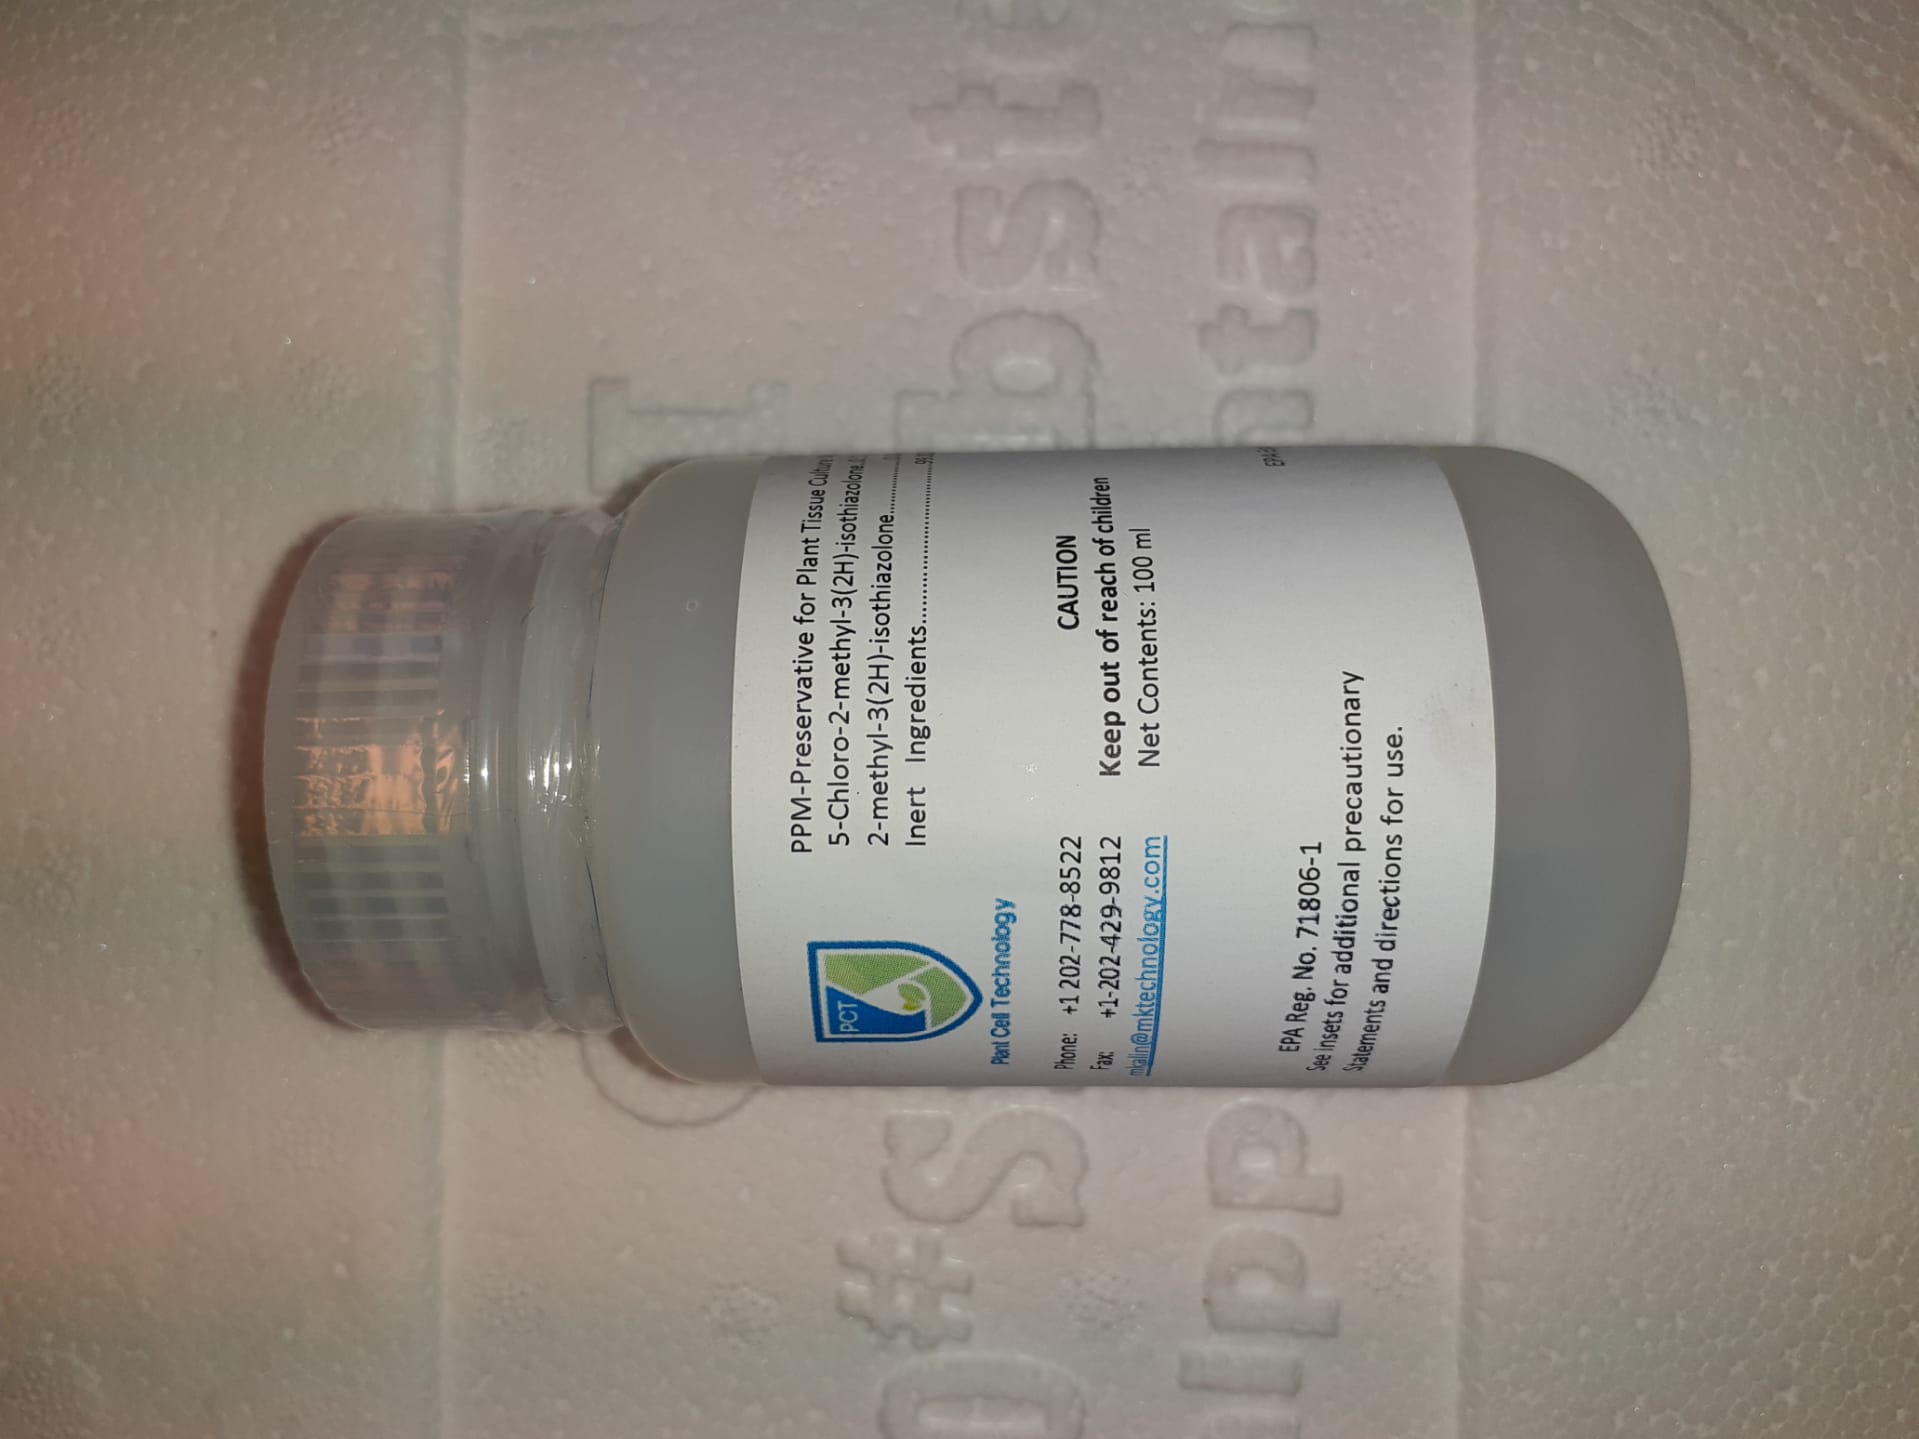 Plant Preservative Mixture™ (PPM) (Plant Cell Technology, Washington, D.C.) is a relatively new, broad-spectrum preservative and biocide for use in plant tissue culture. The active ingredients are 5-chloro-2-methyl- 3(2H)-isothiazolone and 2-methyl-3(2H)- isothiazolone.